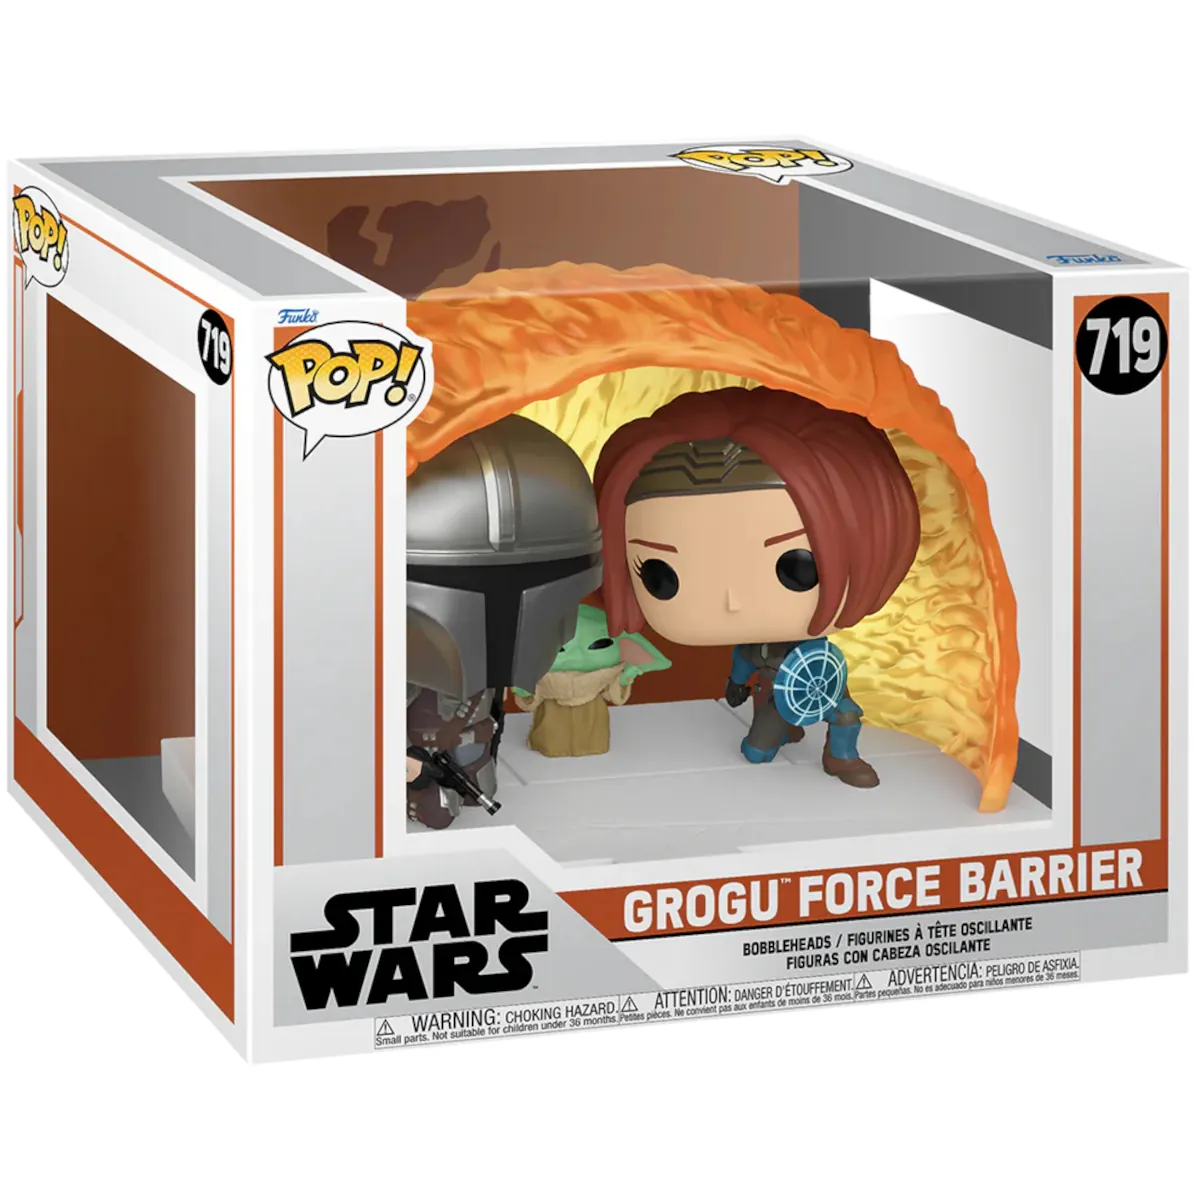 80002 Funko Pop! Television - Star Wars The Mandalorian - Grogu Force Barrier Collectable Vinyl Figure Box Front